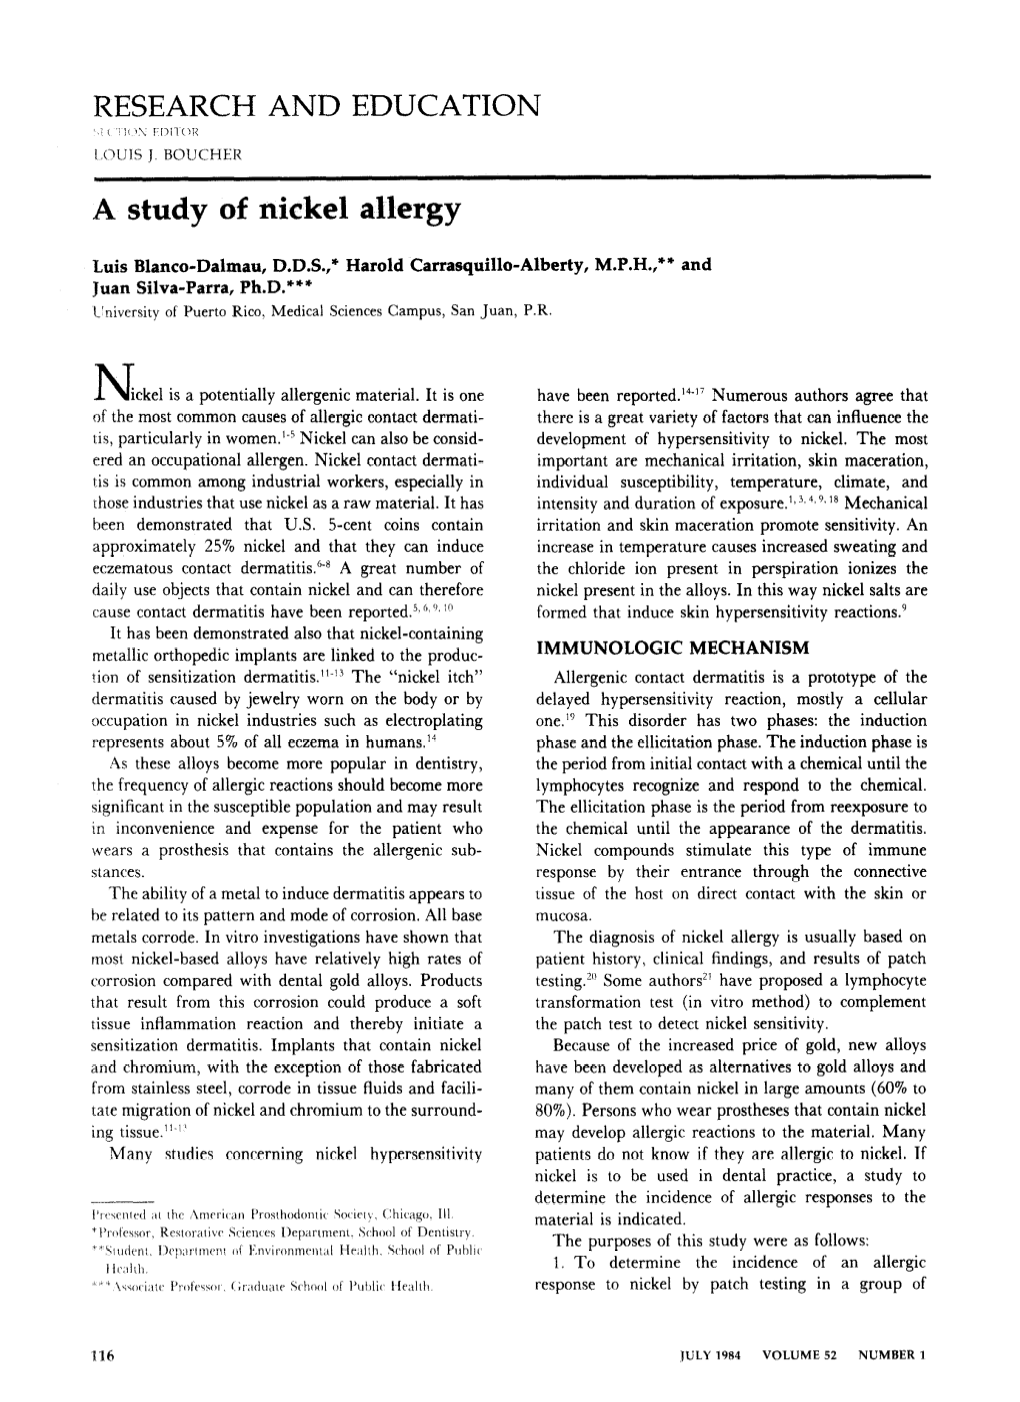 A Study of Nickel Allergy